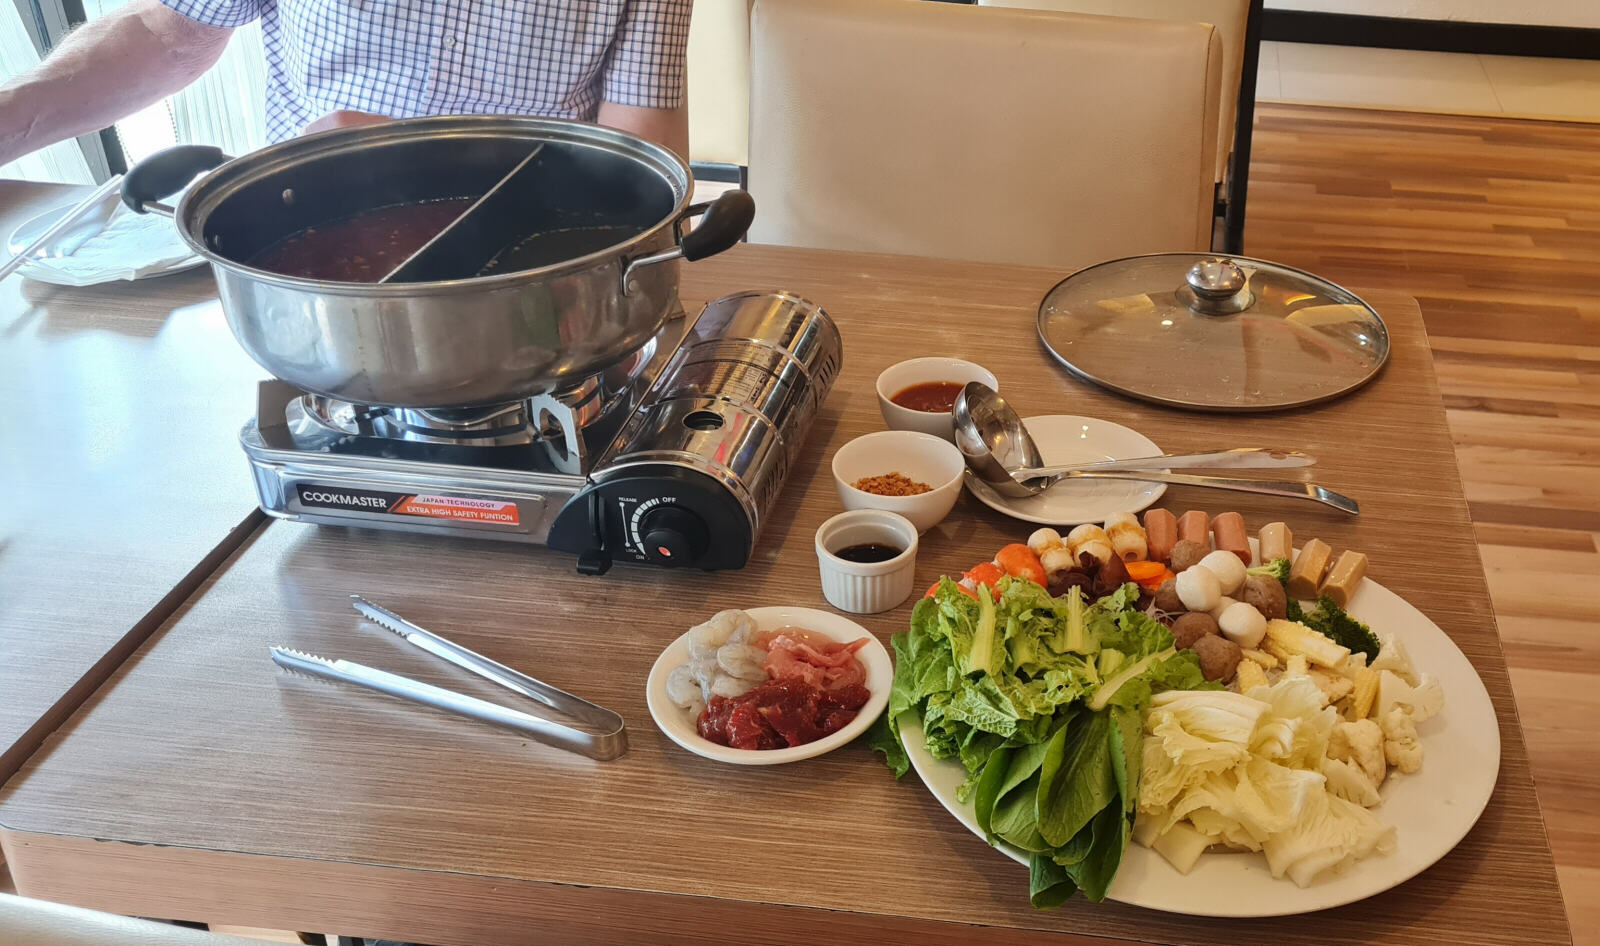 Steamboat lunch at the Aston hotel, Pontianak, Borneo